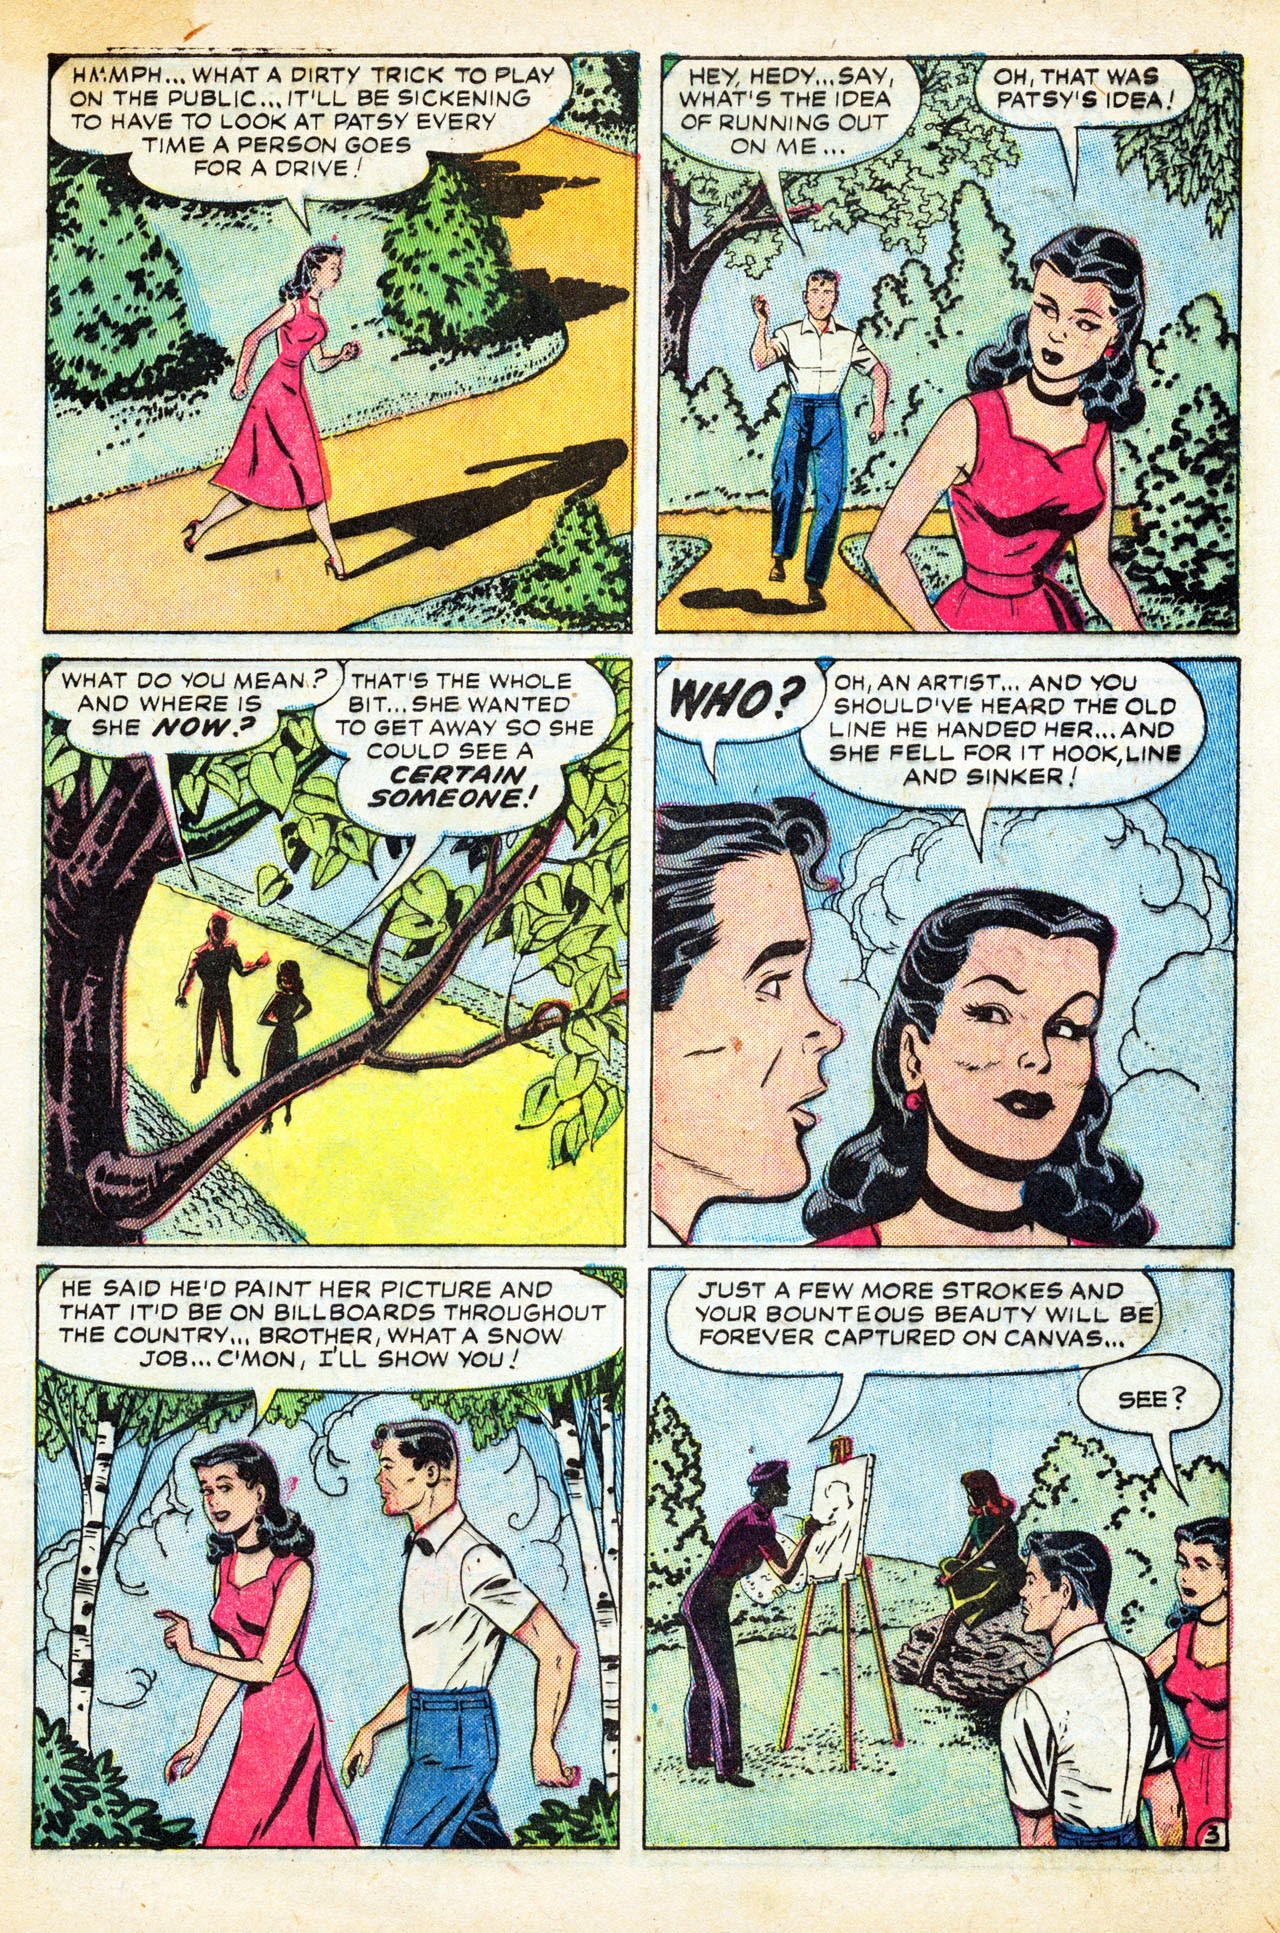 Read online Patsy and Hedy comic -  Issue #32 - 5